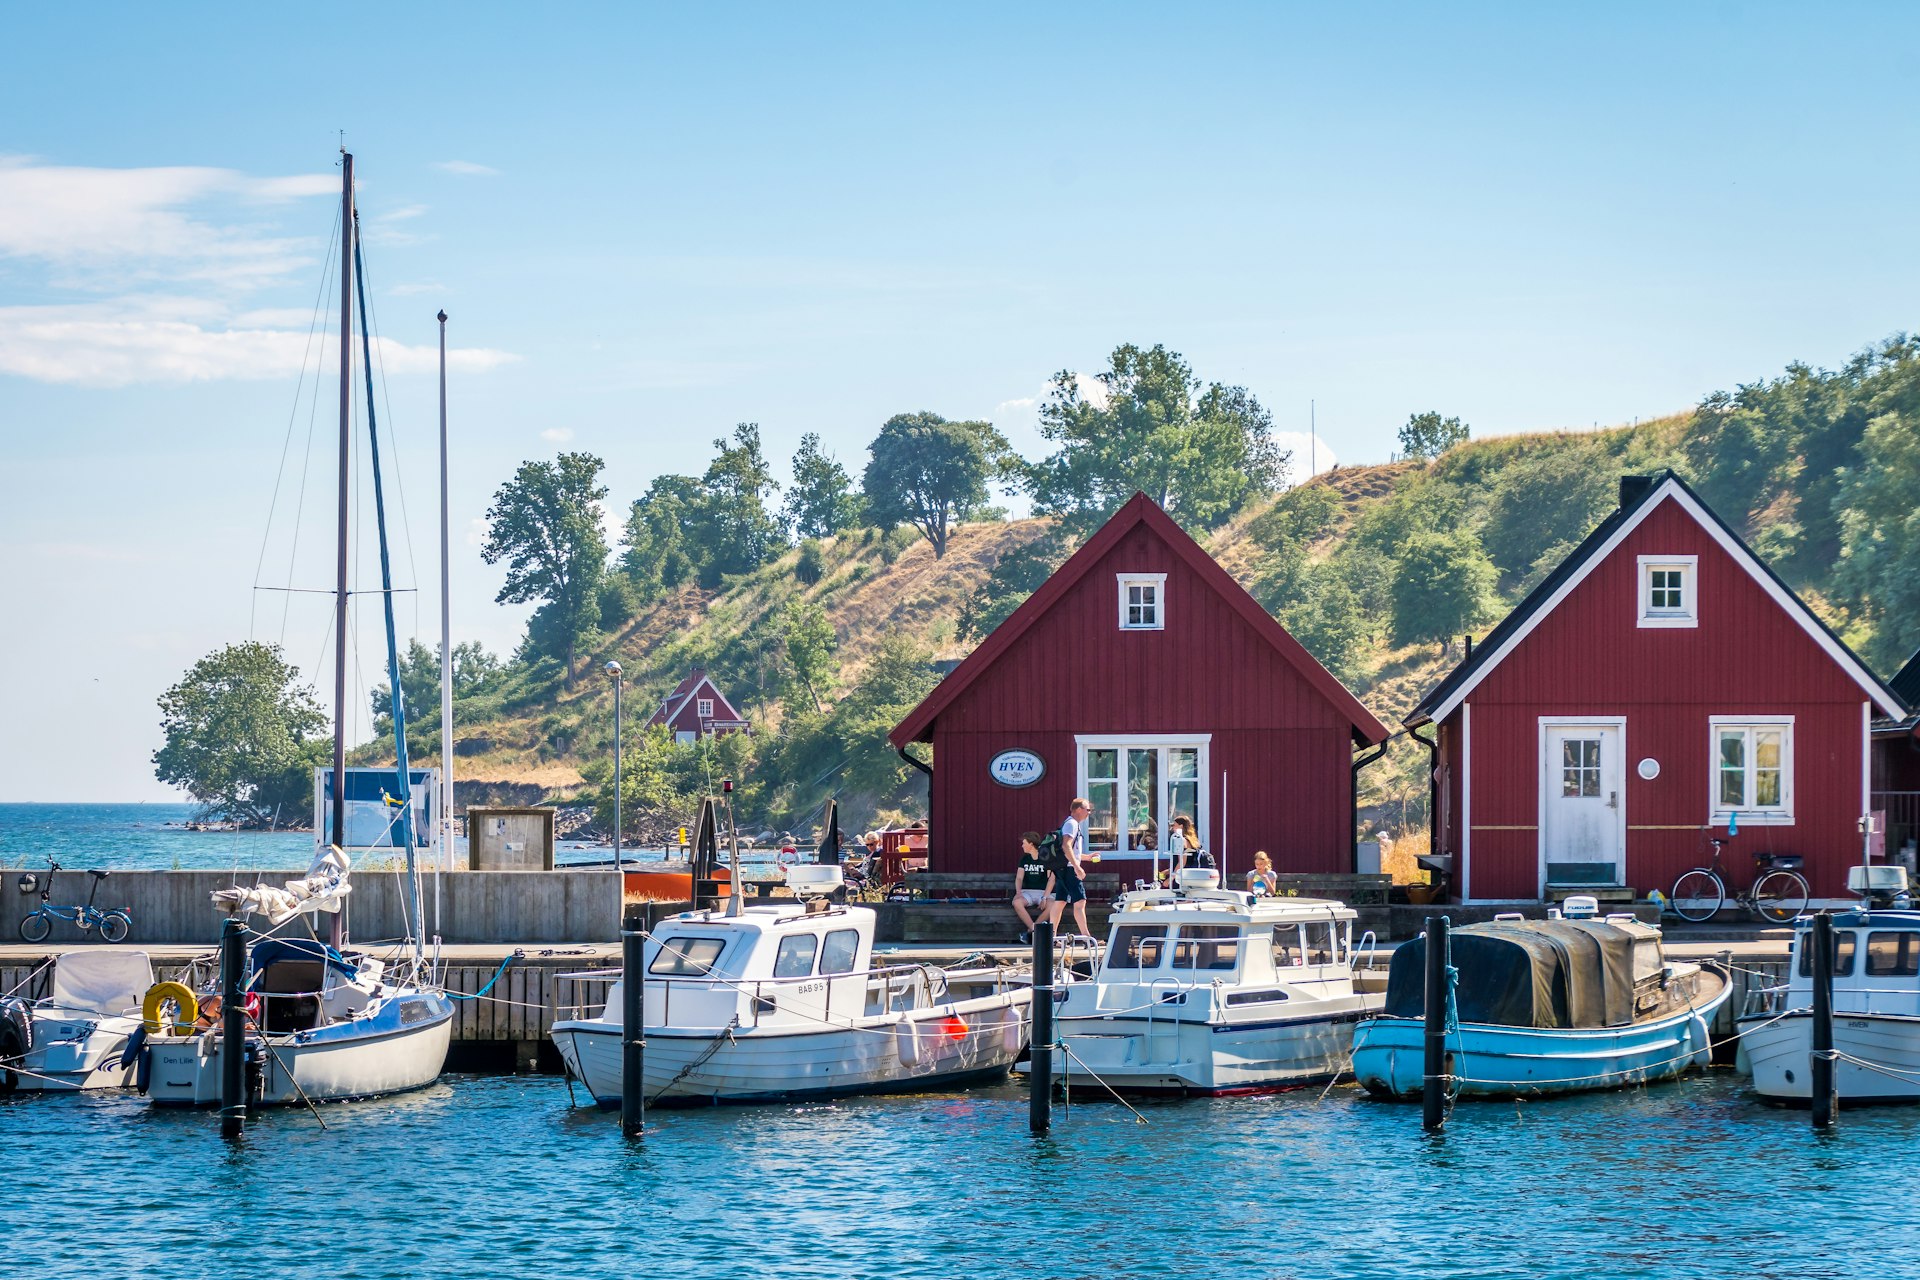 Red boathouses and sailing boats in Ven, Sweden, Bäckvikens hamn.